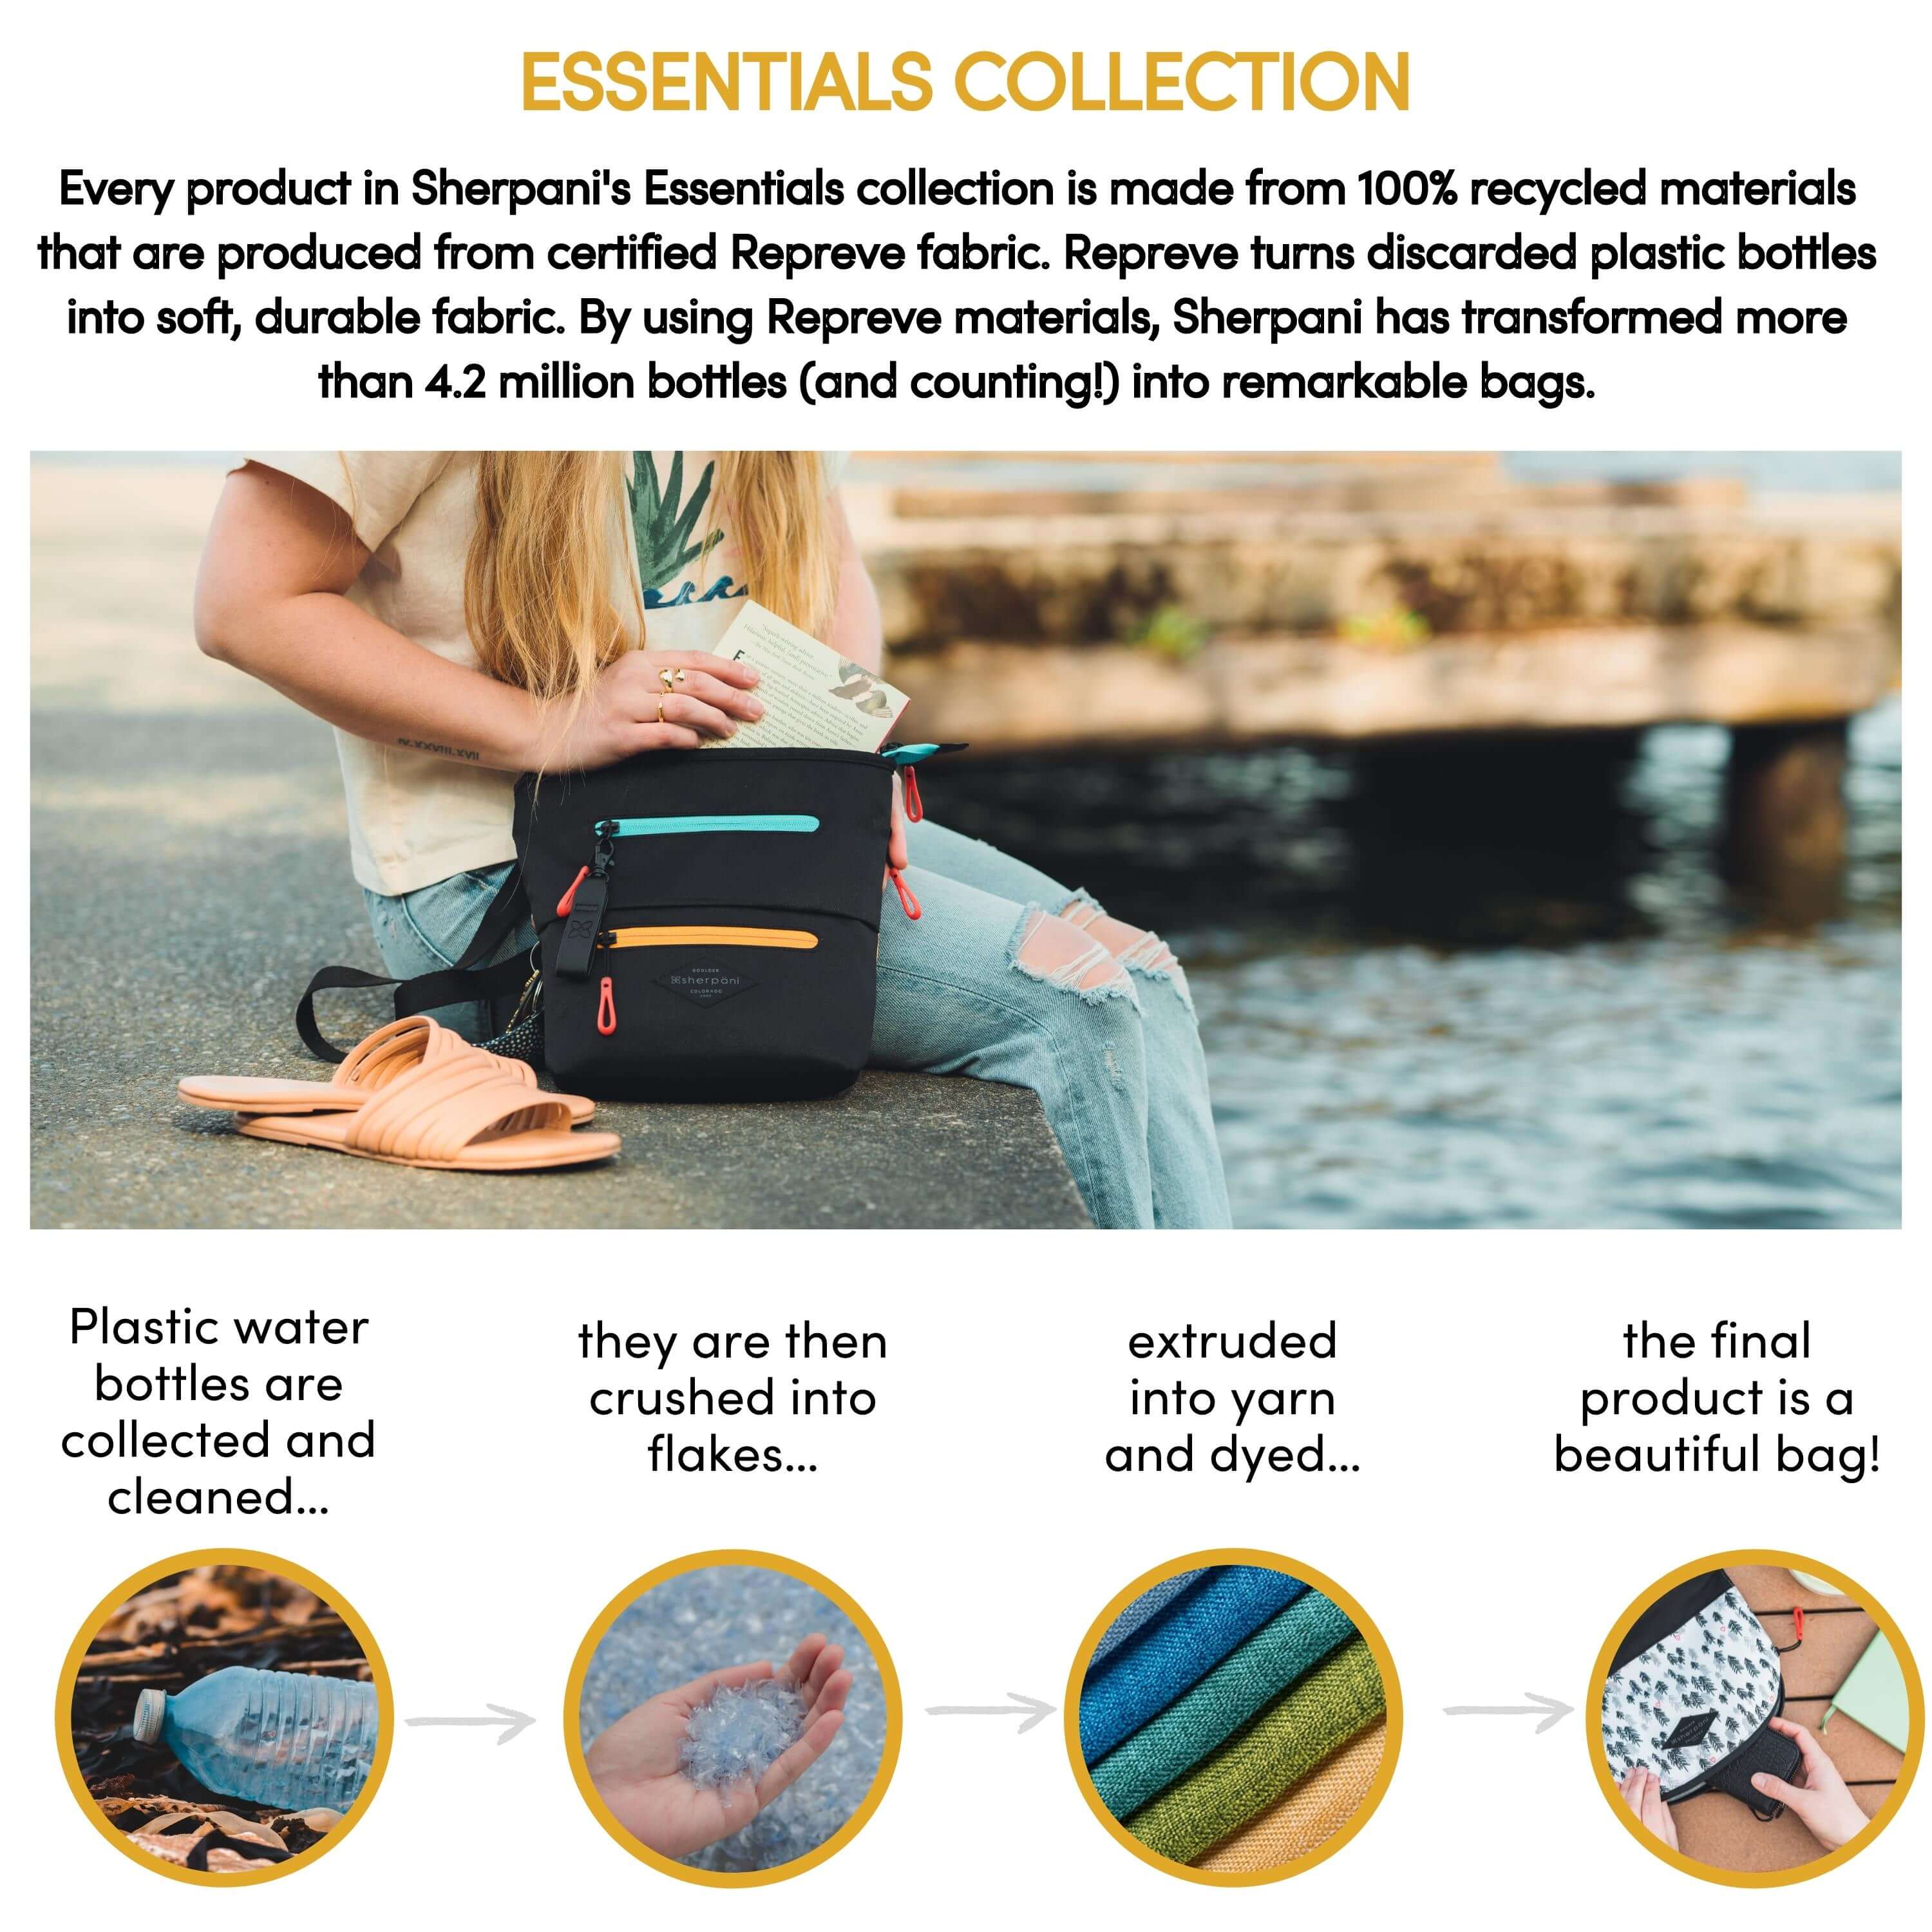 “Essentials Collection: Every product in Sherpani’s Essentials collection is made from 100% recycled materials that are produced and certified Repreve fabric. Repreve turns discarded plastic bottles into soft, durable fabric. By using Repreve materials, Sherpani has transformed more than 4.2 million bottles (and counting!) into remarkable bags. Plastic water bottles are collected and cleaned…they are then crushed into flakes…extruded into yarn and dyed…the final product is a beautiful bag!”